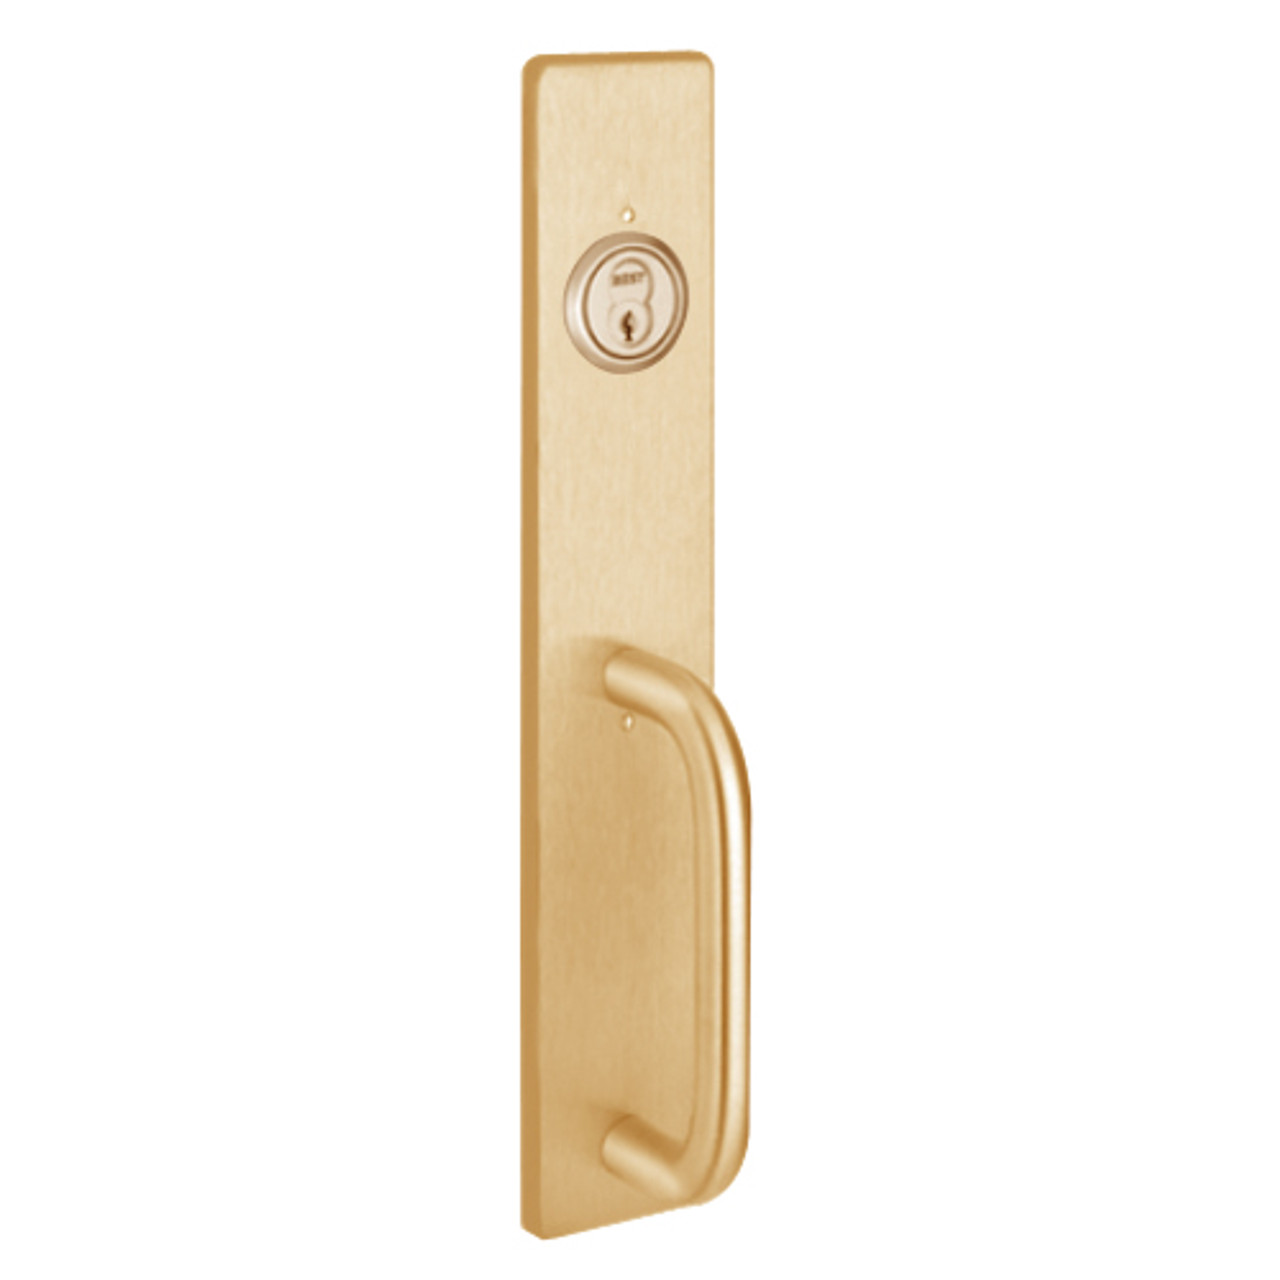 R1703C-612 PHI Key Retracts Latchbolt Retrofit Trim with C Design Pull for Apex and Olympian Series Exit Device in Satin Bronze Finish